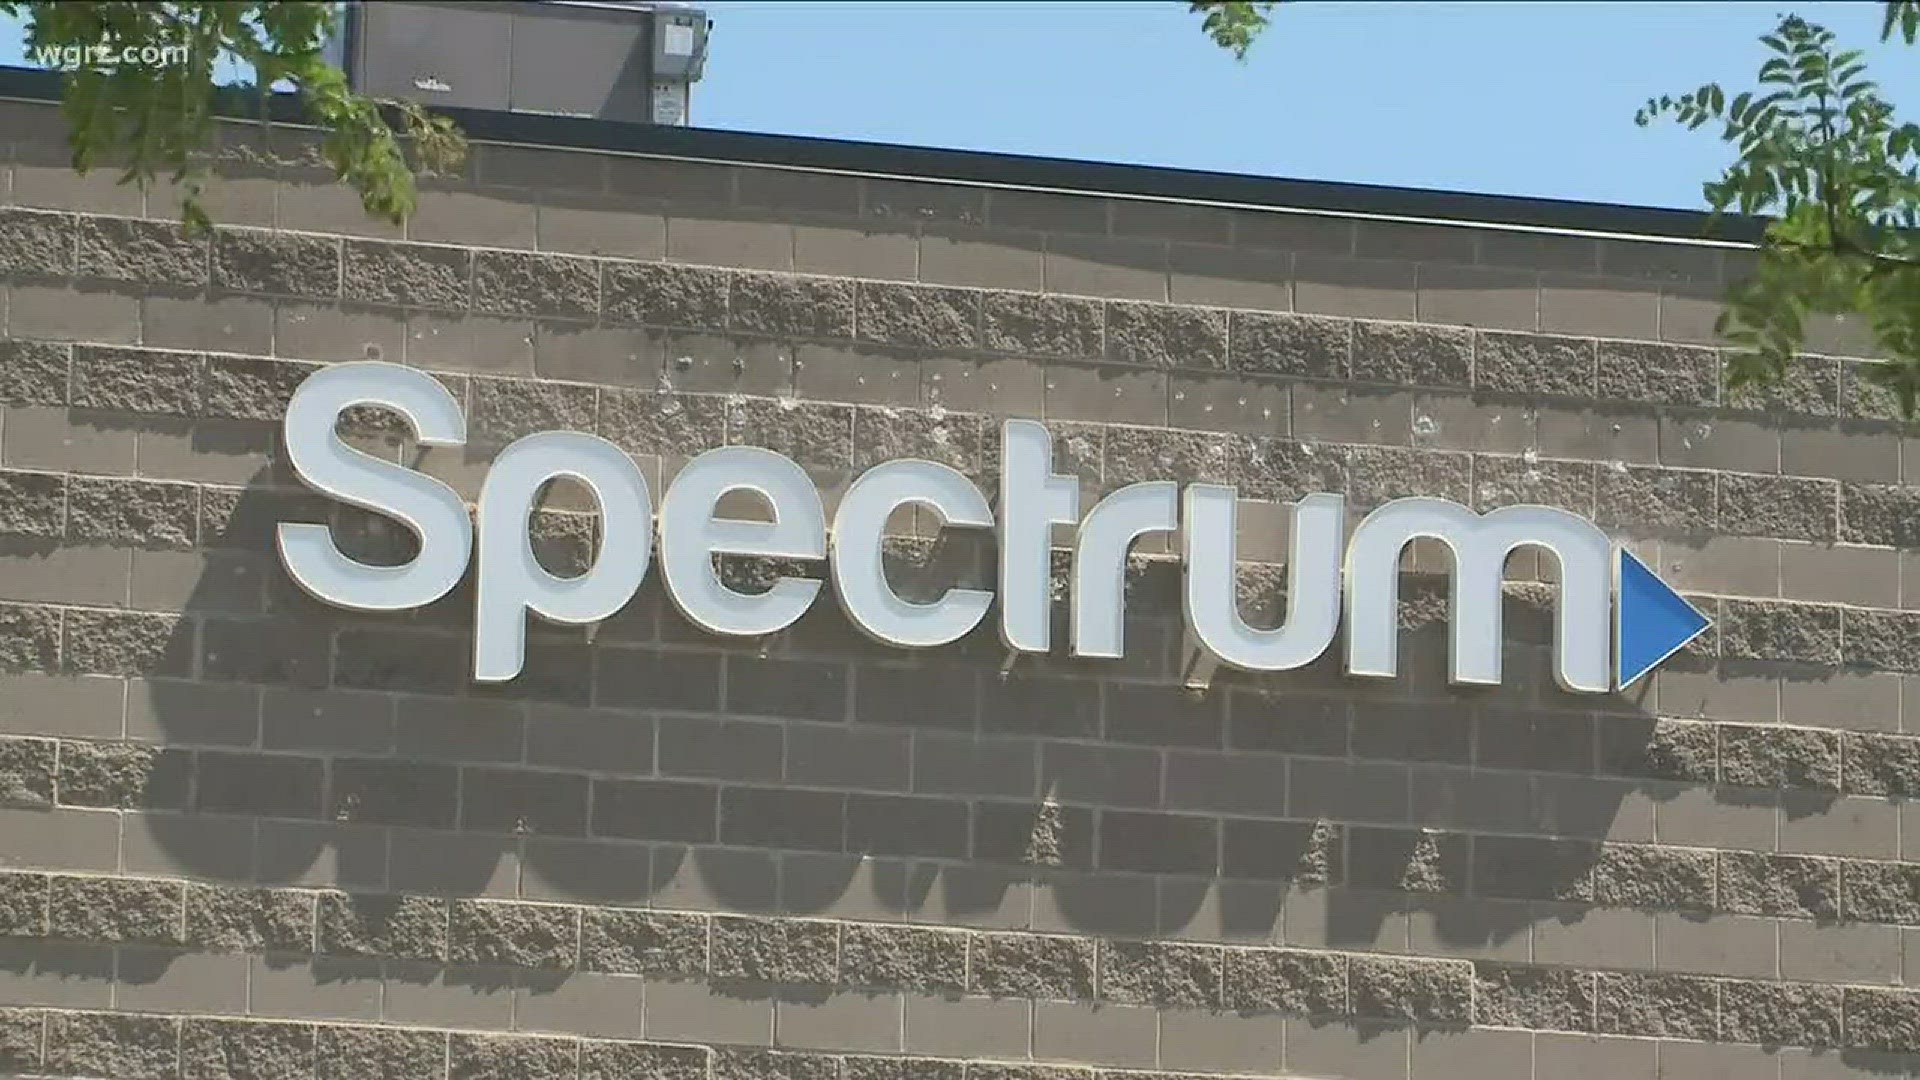 Charter Spectrum Gets Another Extension